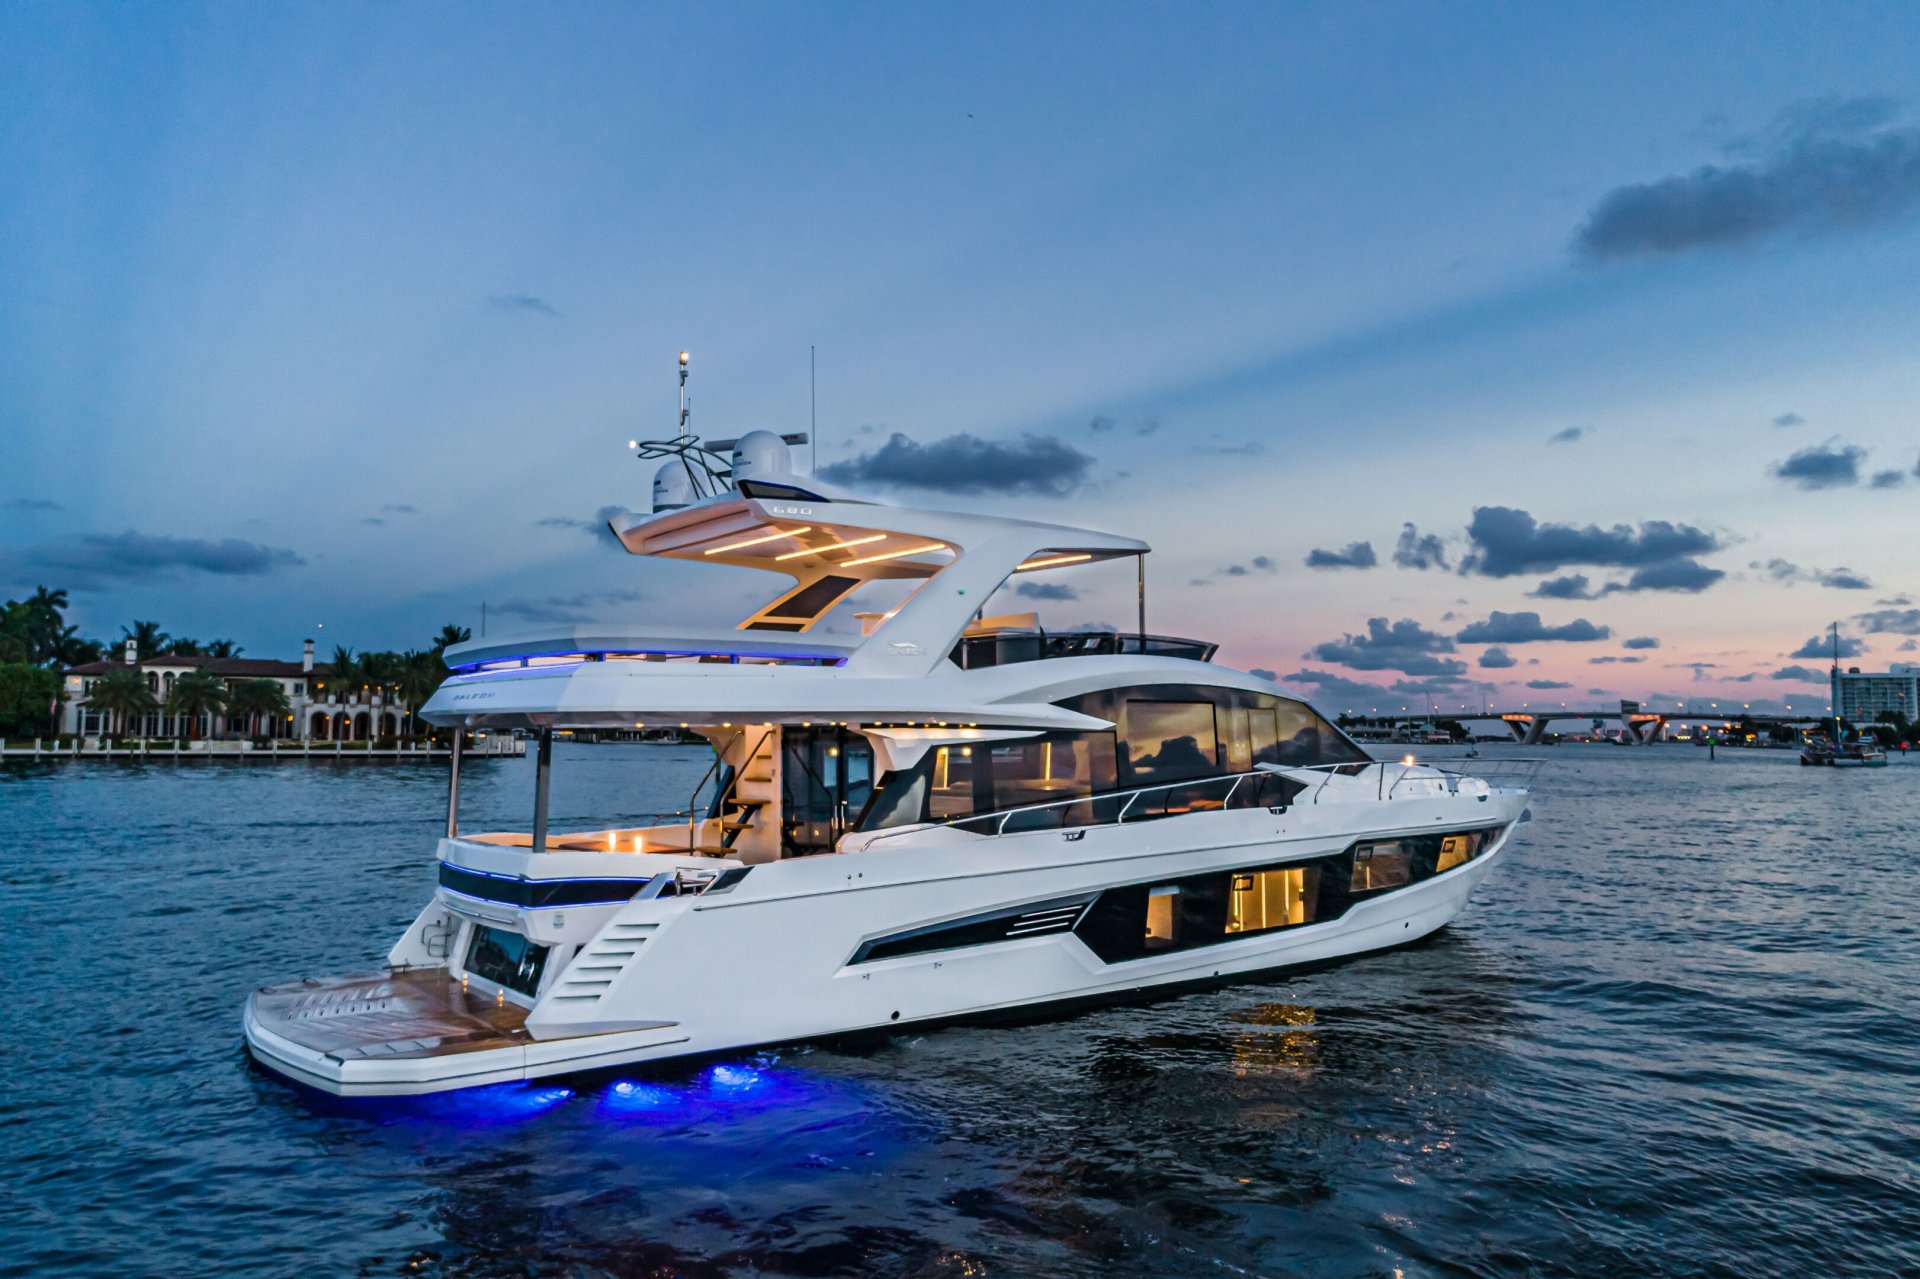 360 VR Virtual Tours of the Galeon 680 FLY